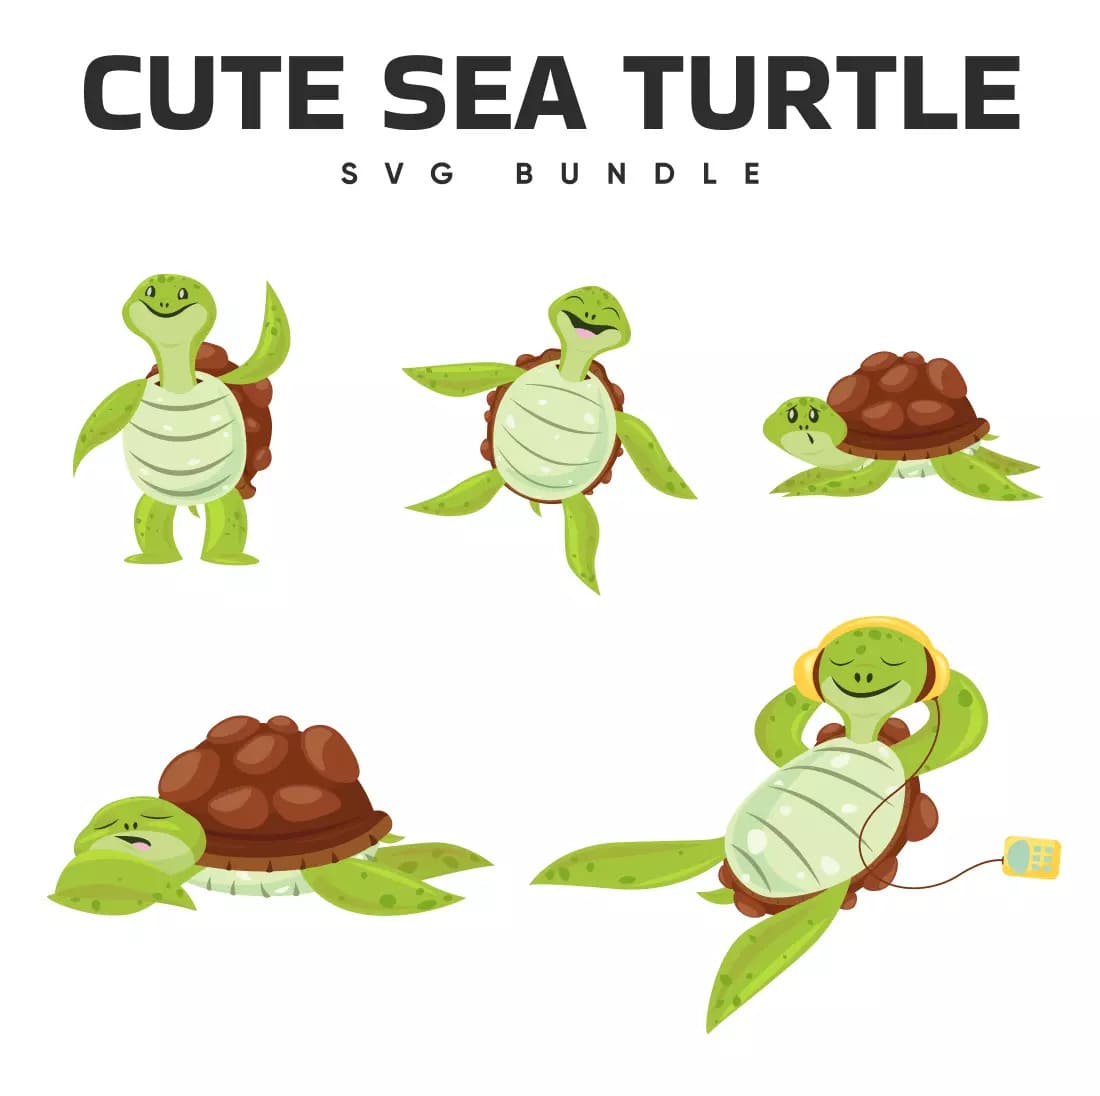 Group of turtles with different poses and expressions.